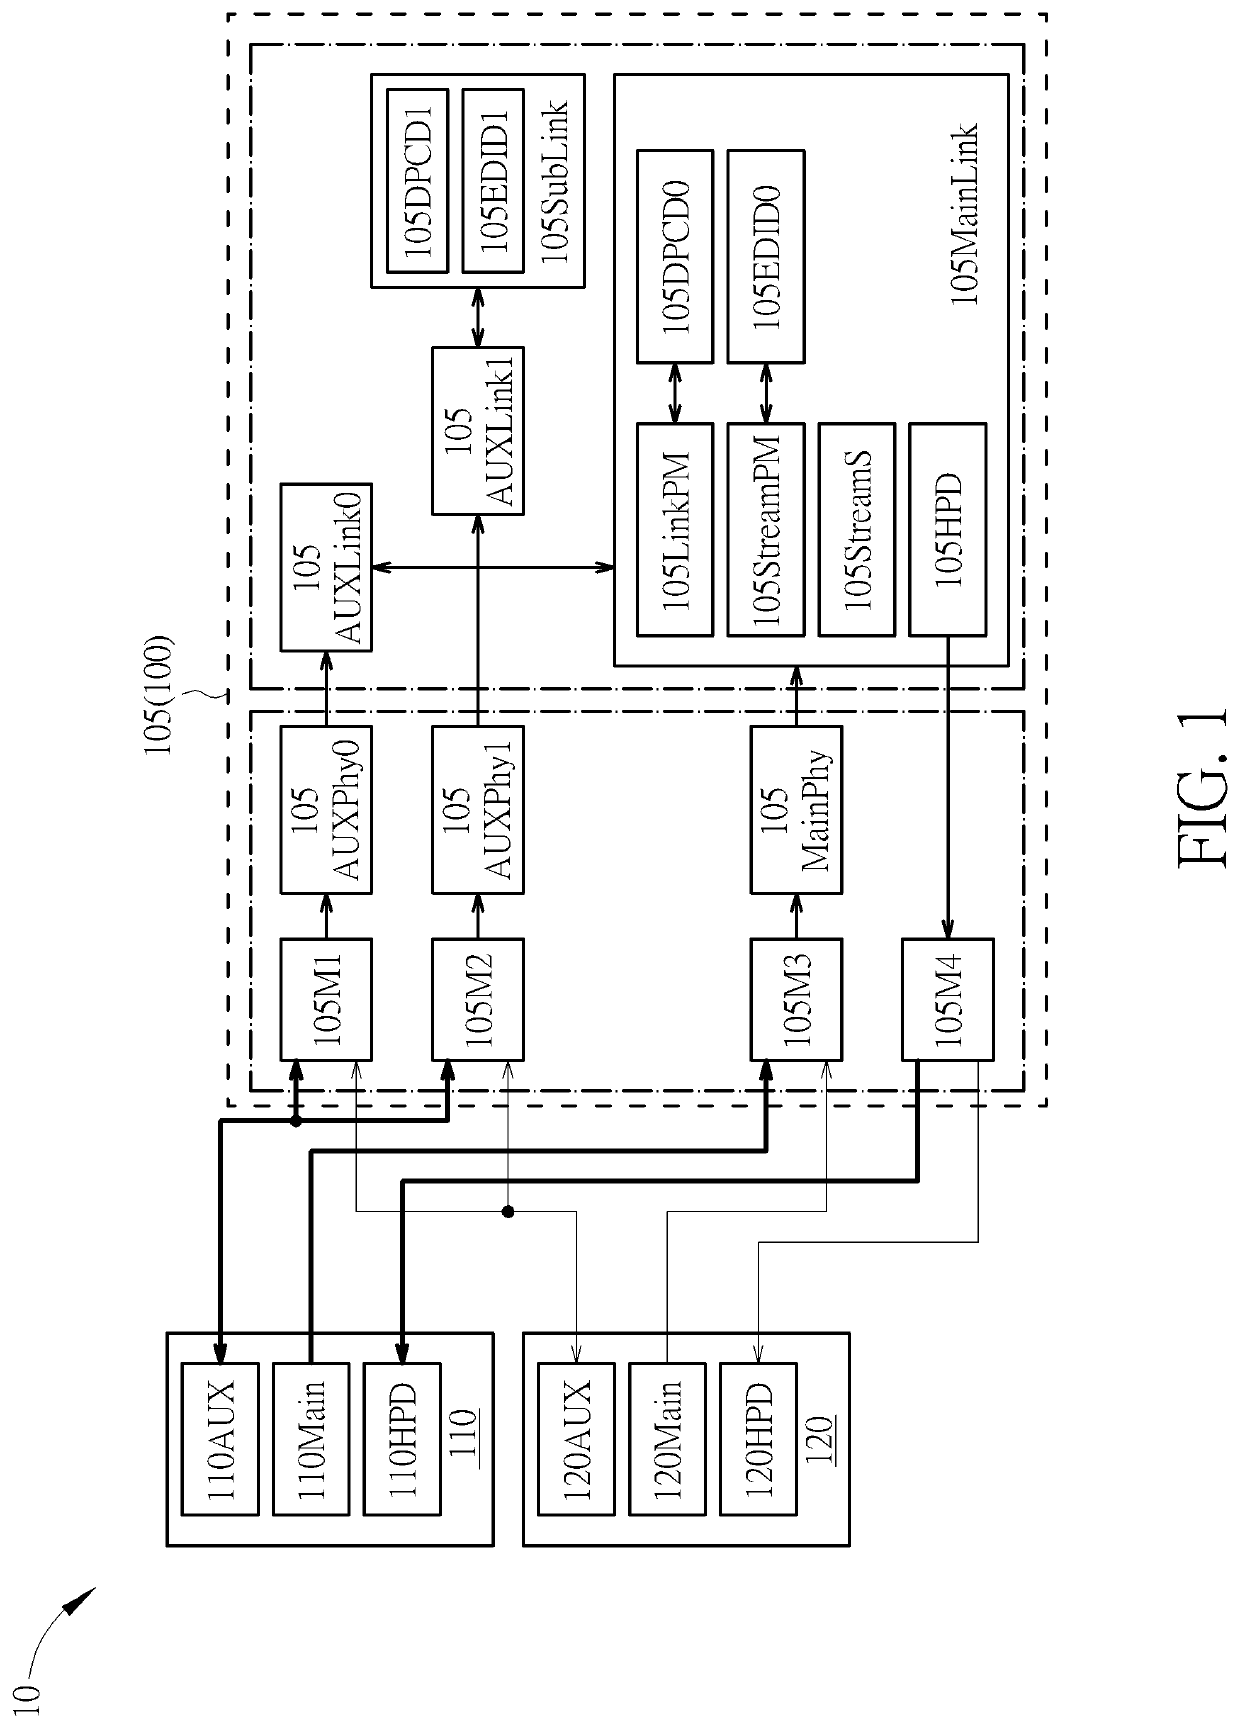 Signal Processing Circuit and Link Initialization Method Thereof